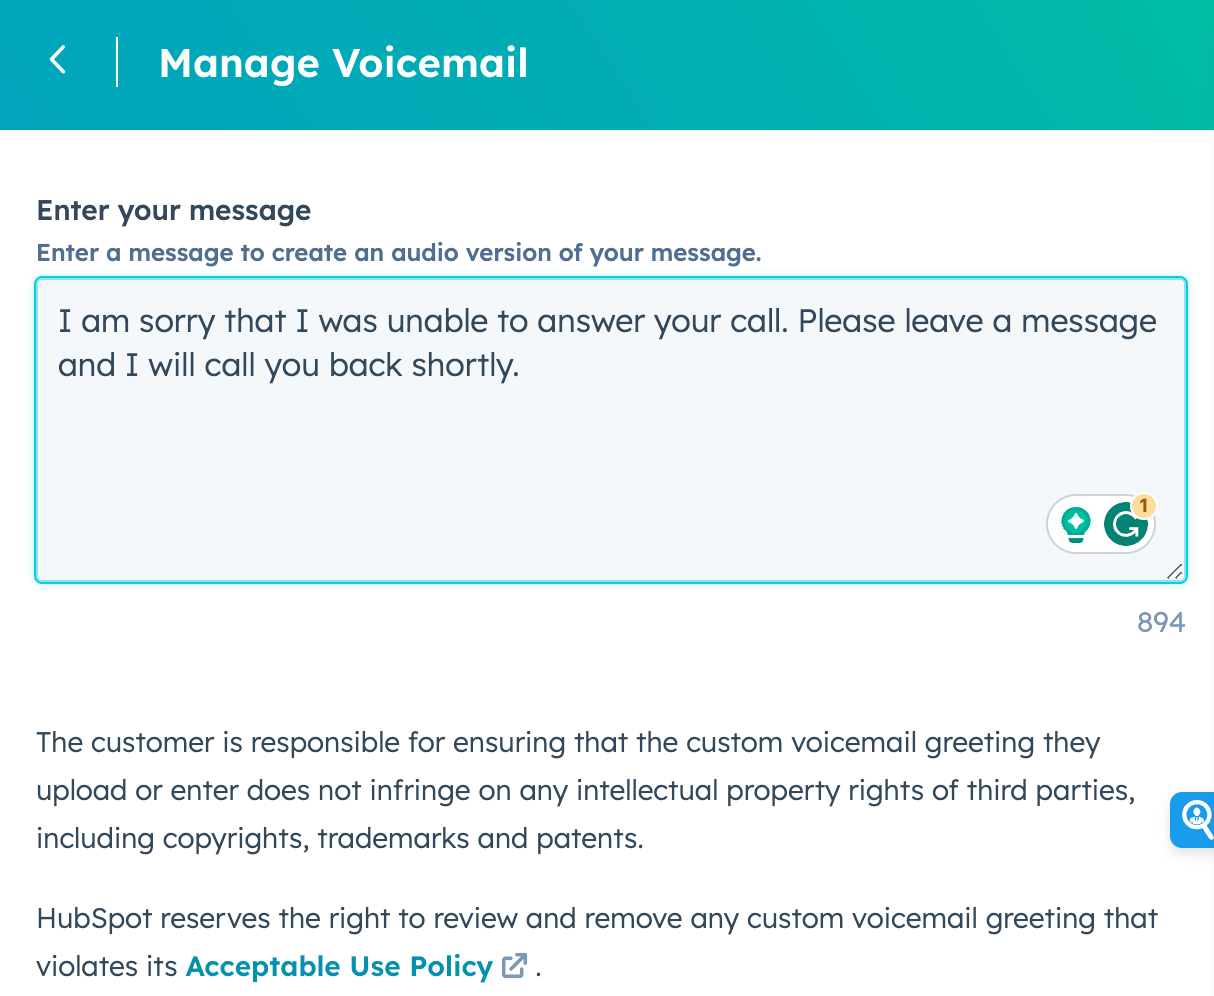 Manage voicemail